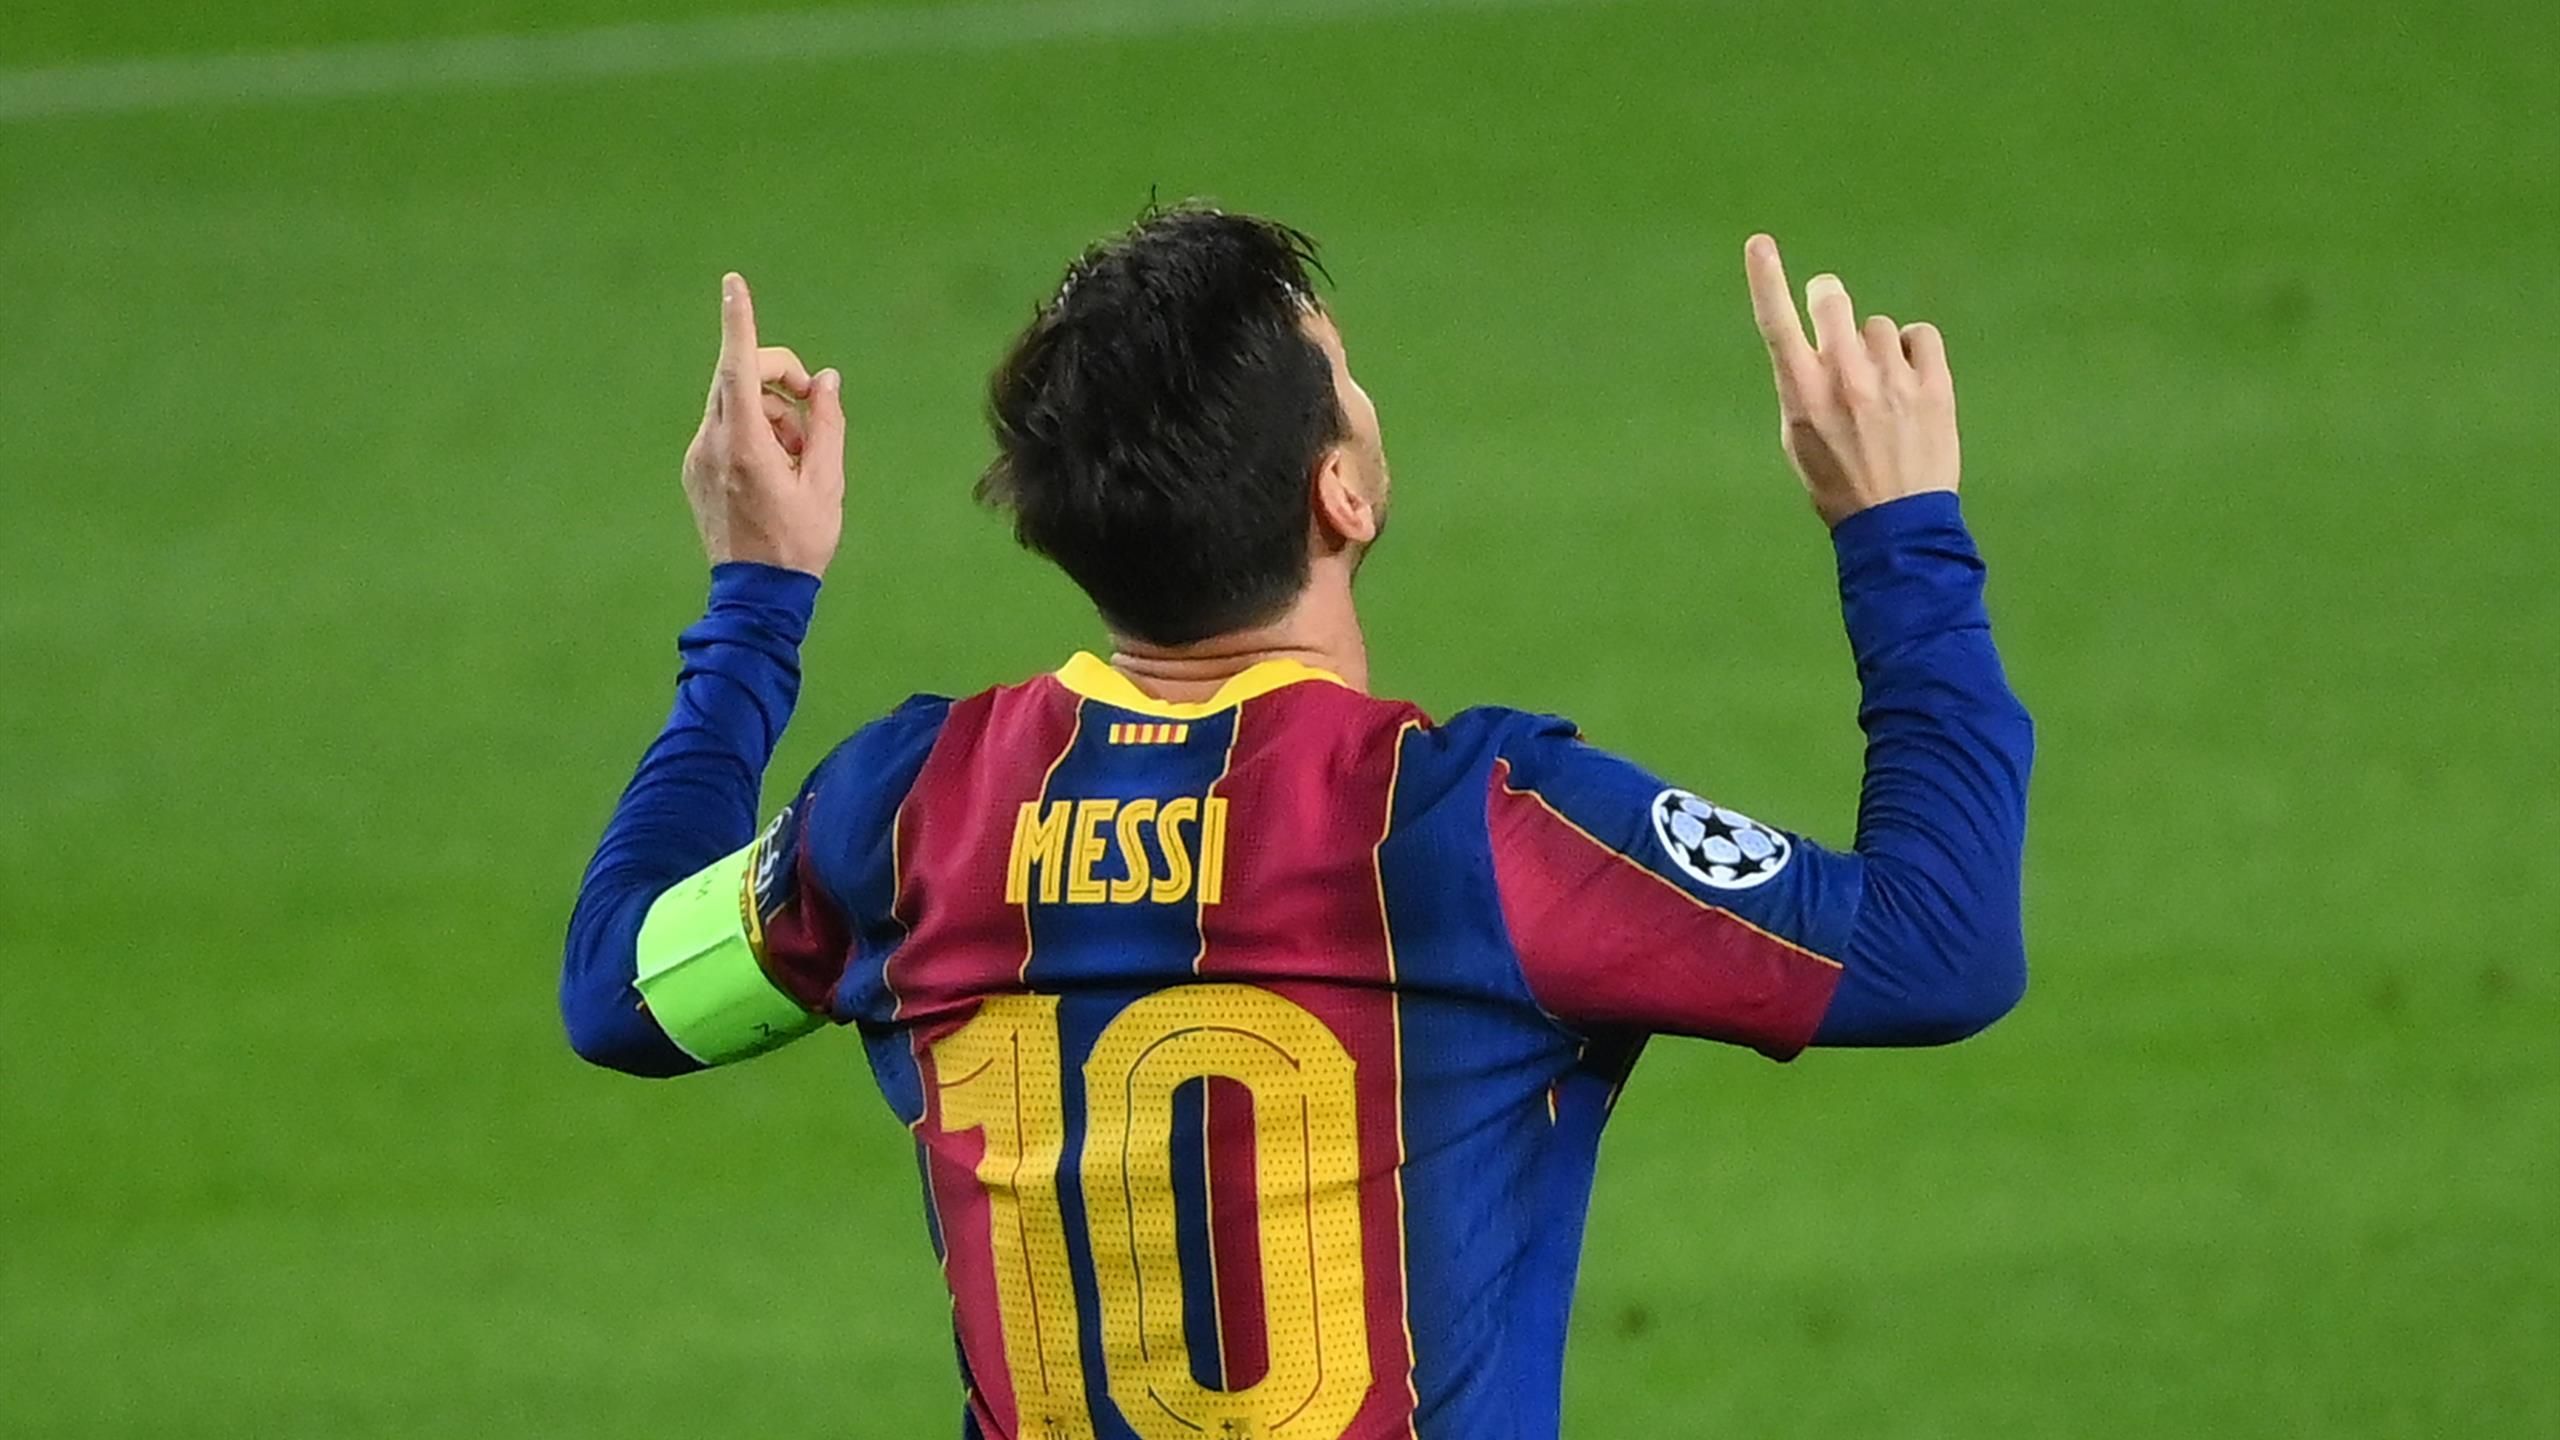 Flashes of Lionel Messi magic, but his role in Ronald Koeman's Barcelona team remains unclear